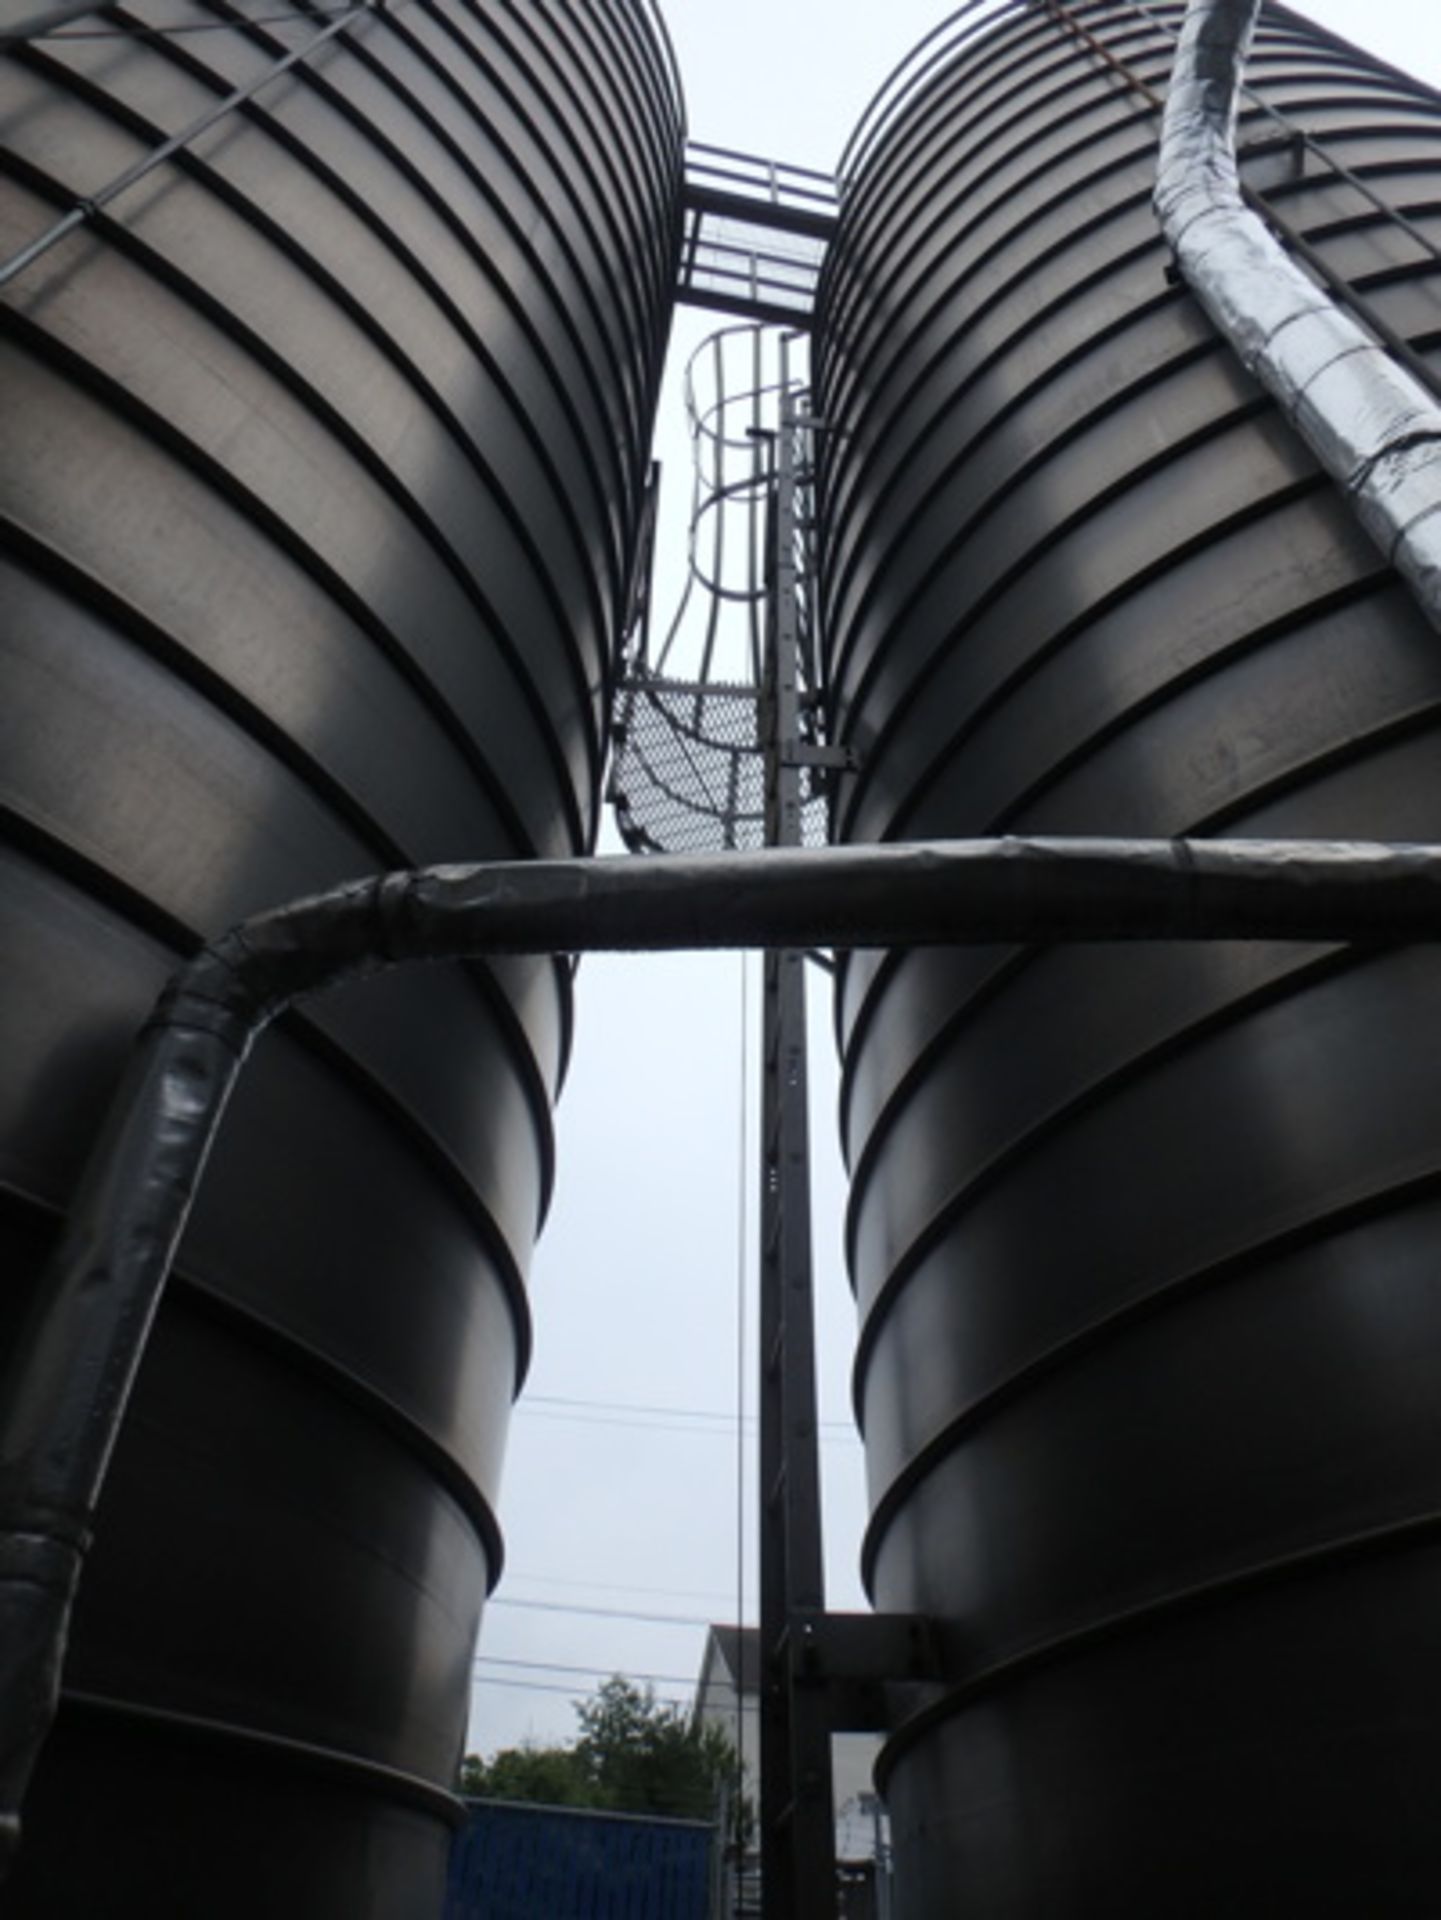 Catwalk between Silos, Ladder, Safety Cage (Asset Location: Outside), (Site Location: Thorndale, PA)